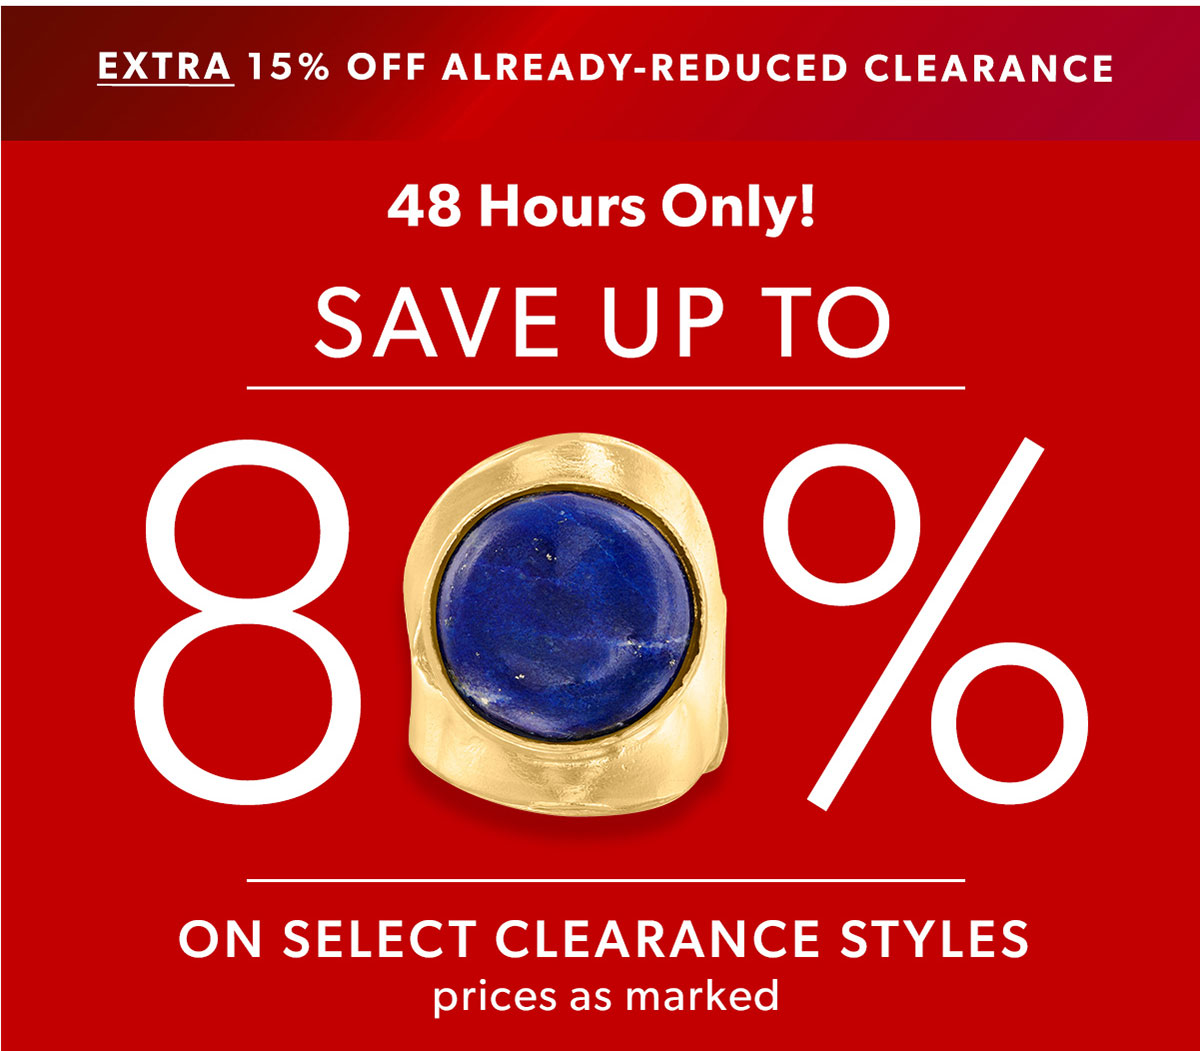 48 Hours Only! Save Up To 80% on Select Clearance Styles